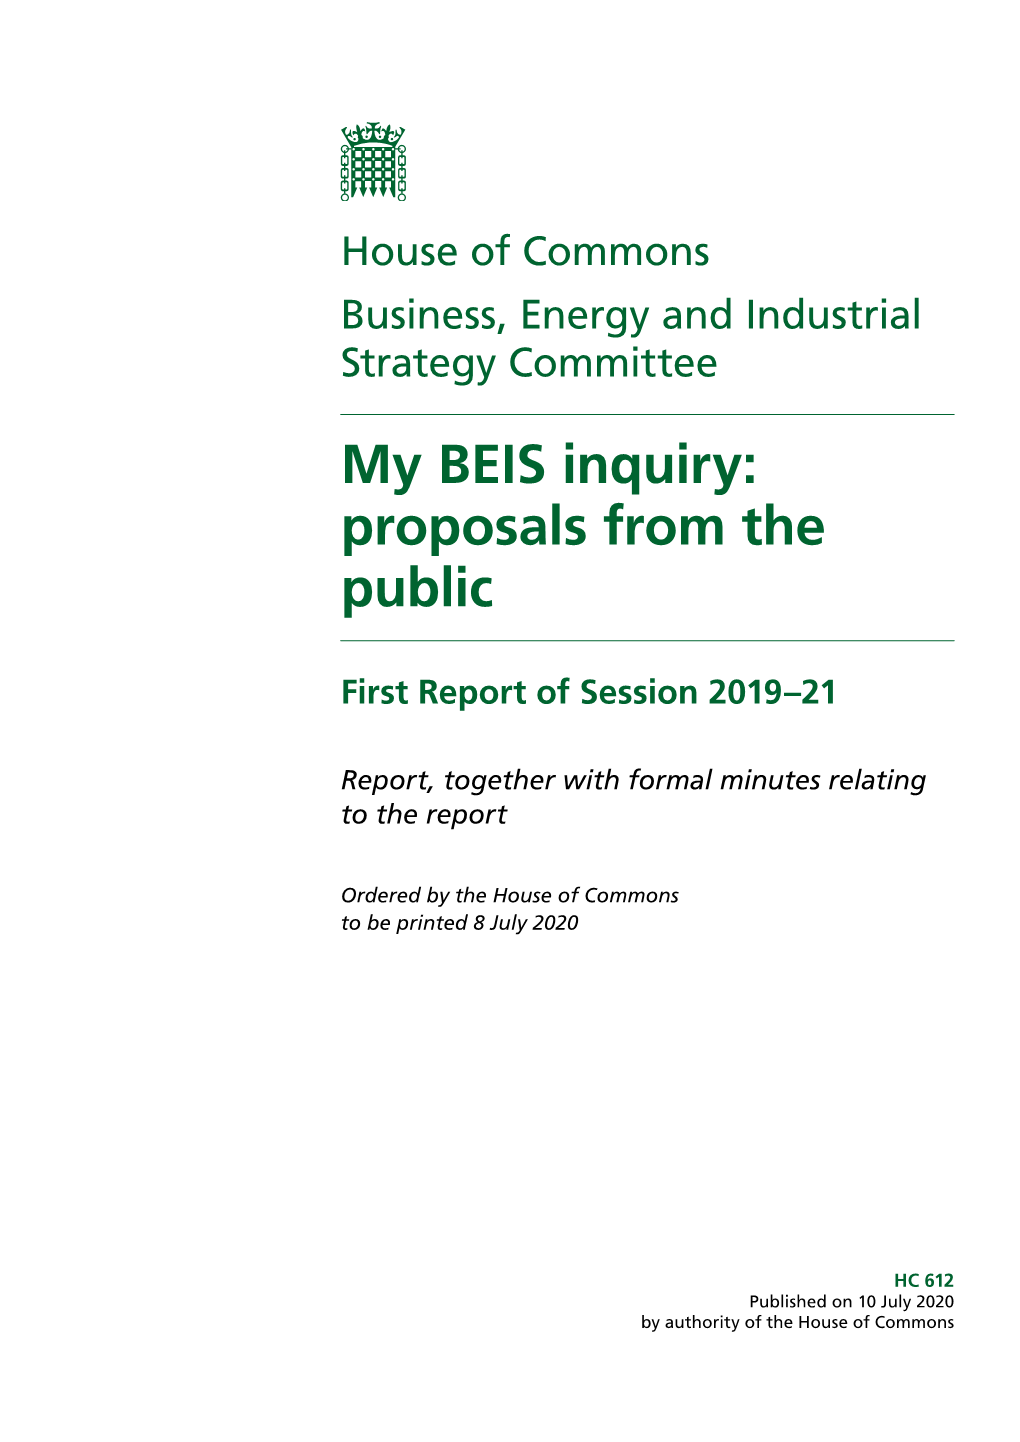 My BEIS Inquiry: Proposals from the Public